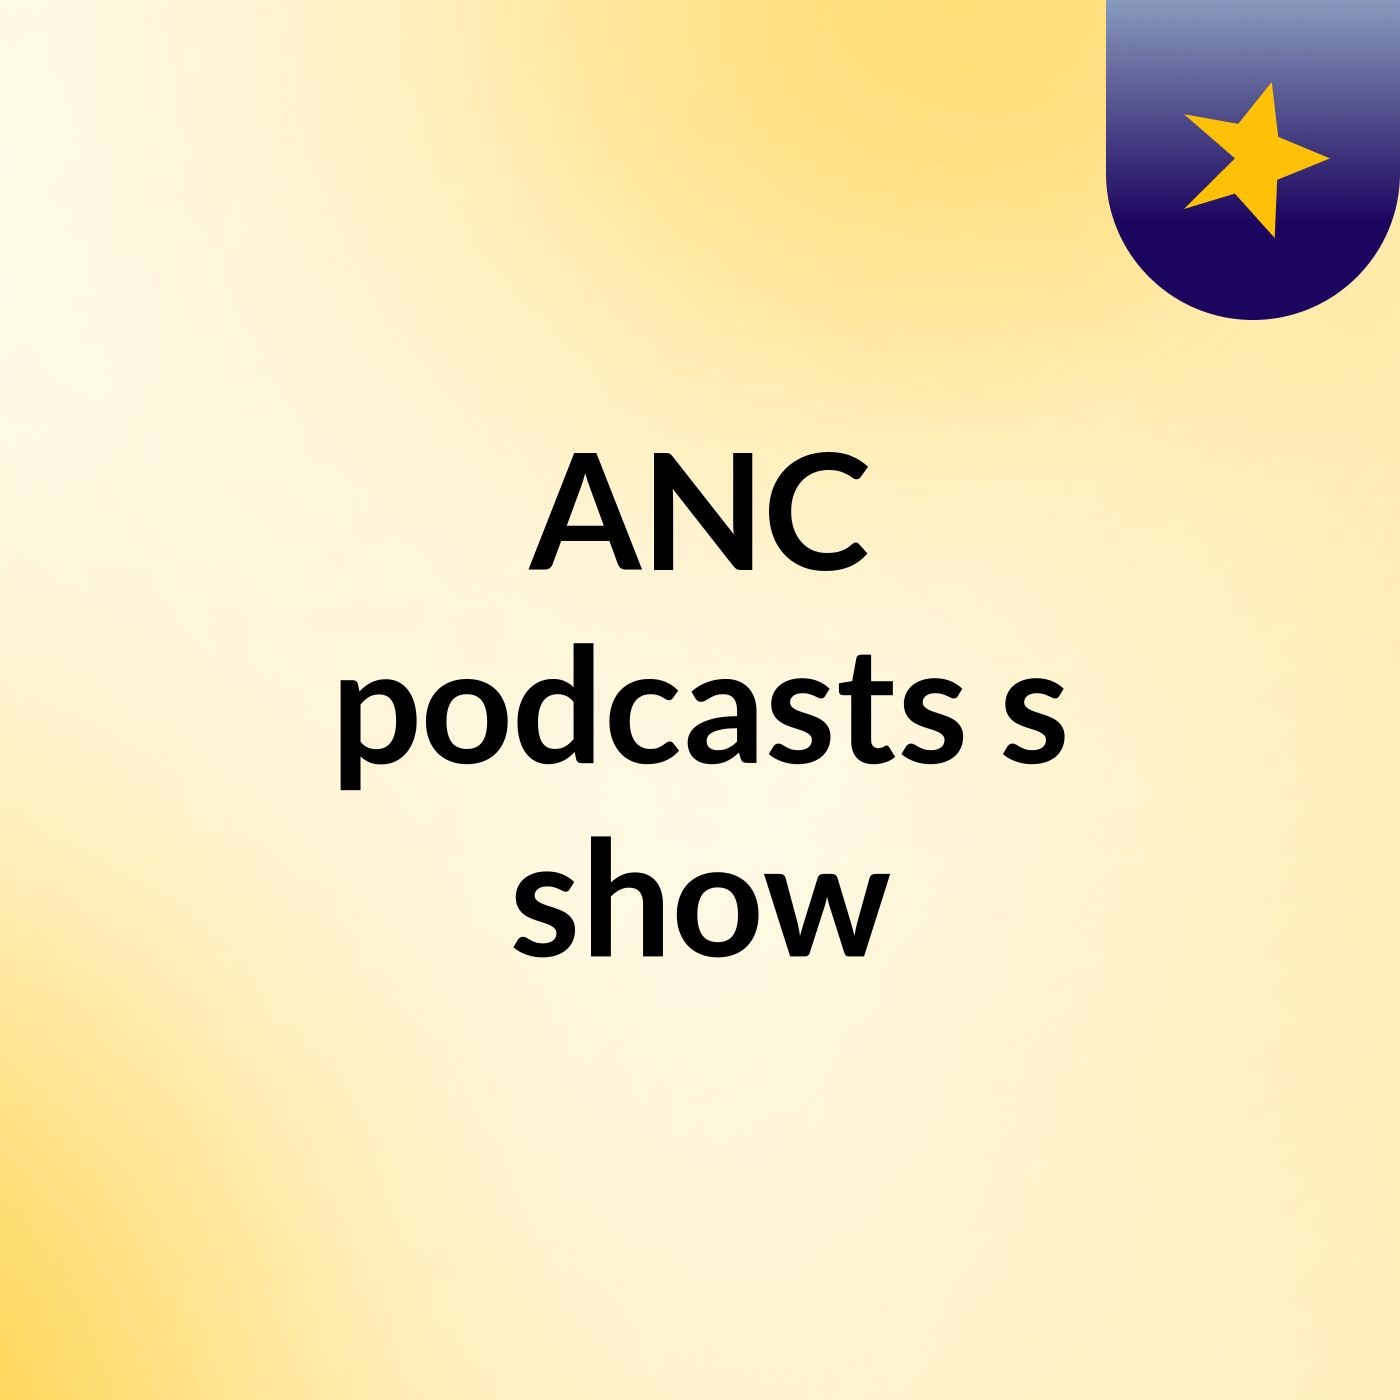 ANC podcasts